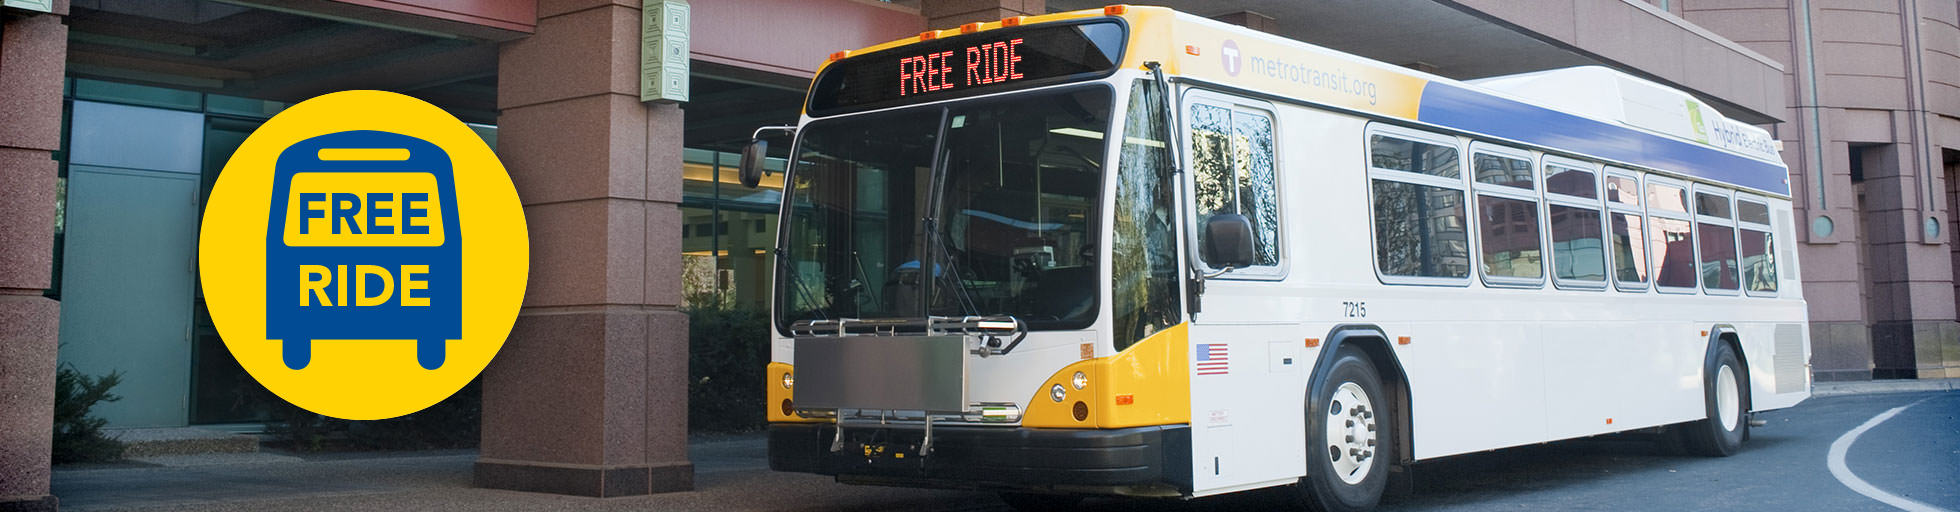 Image of a Free Ride bus near the Convention Center